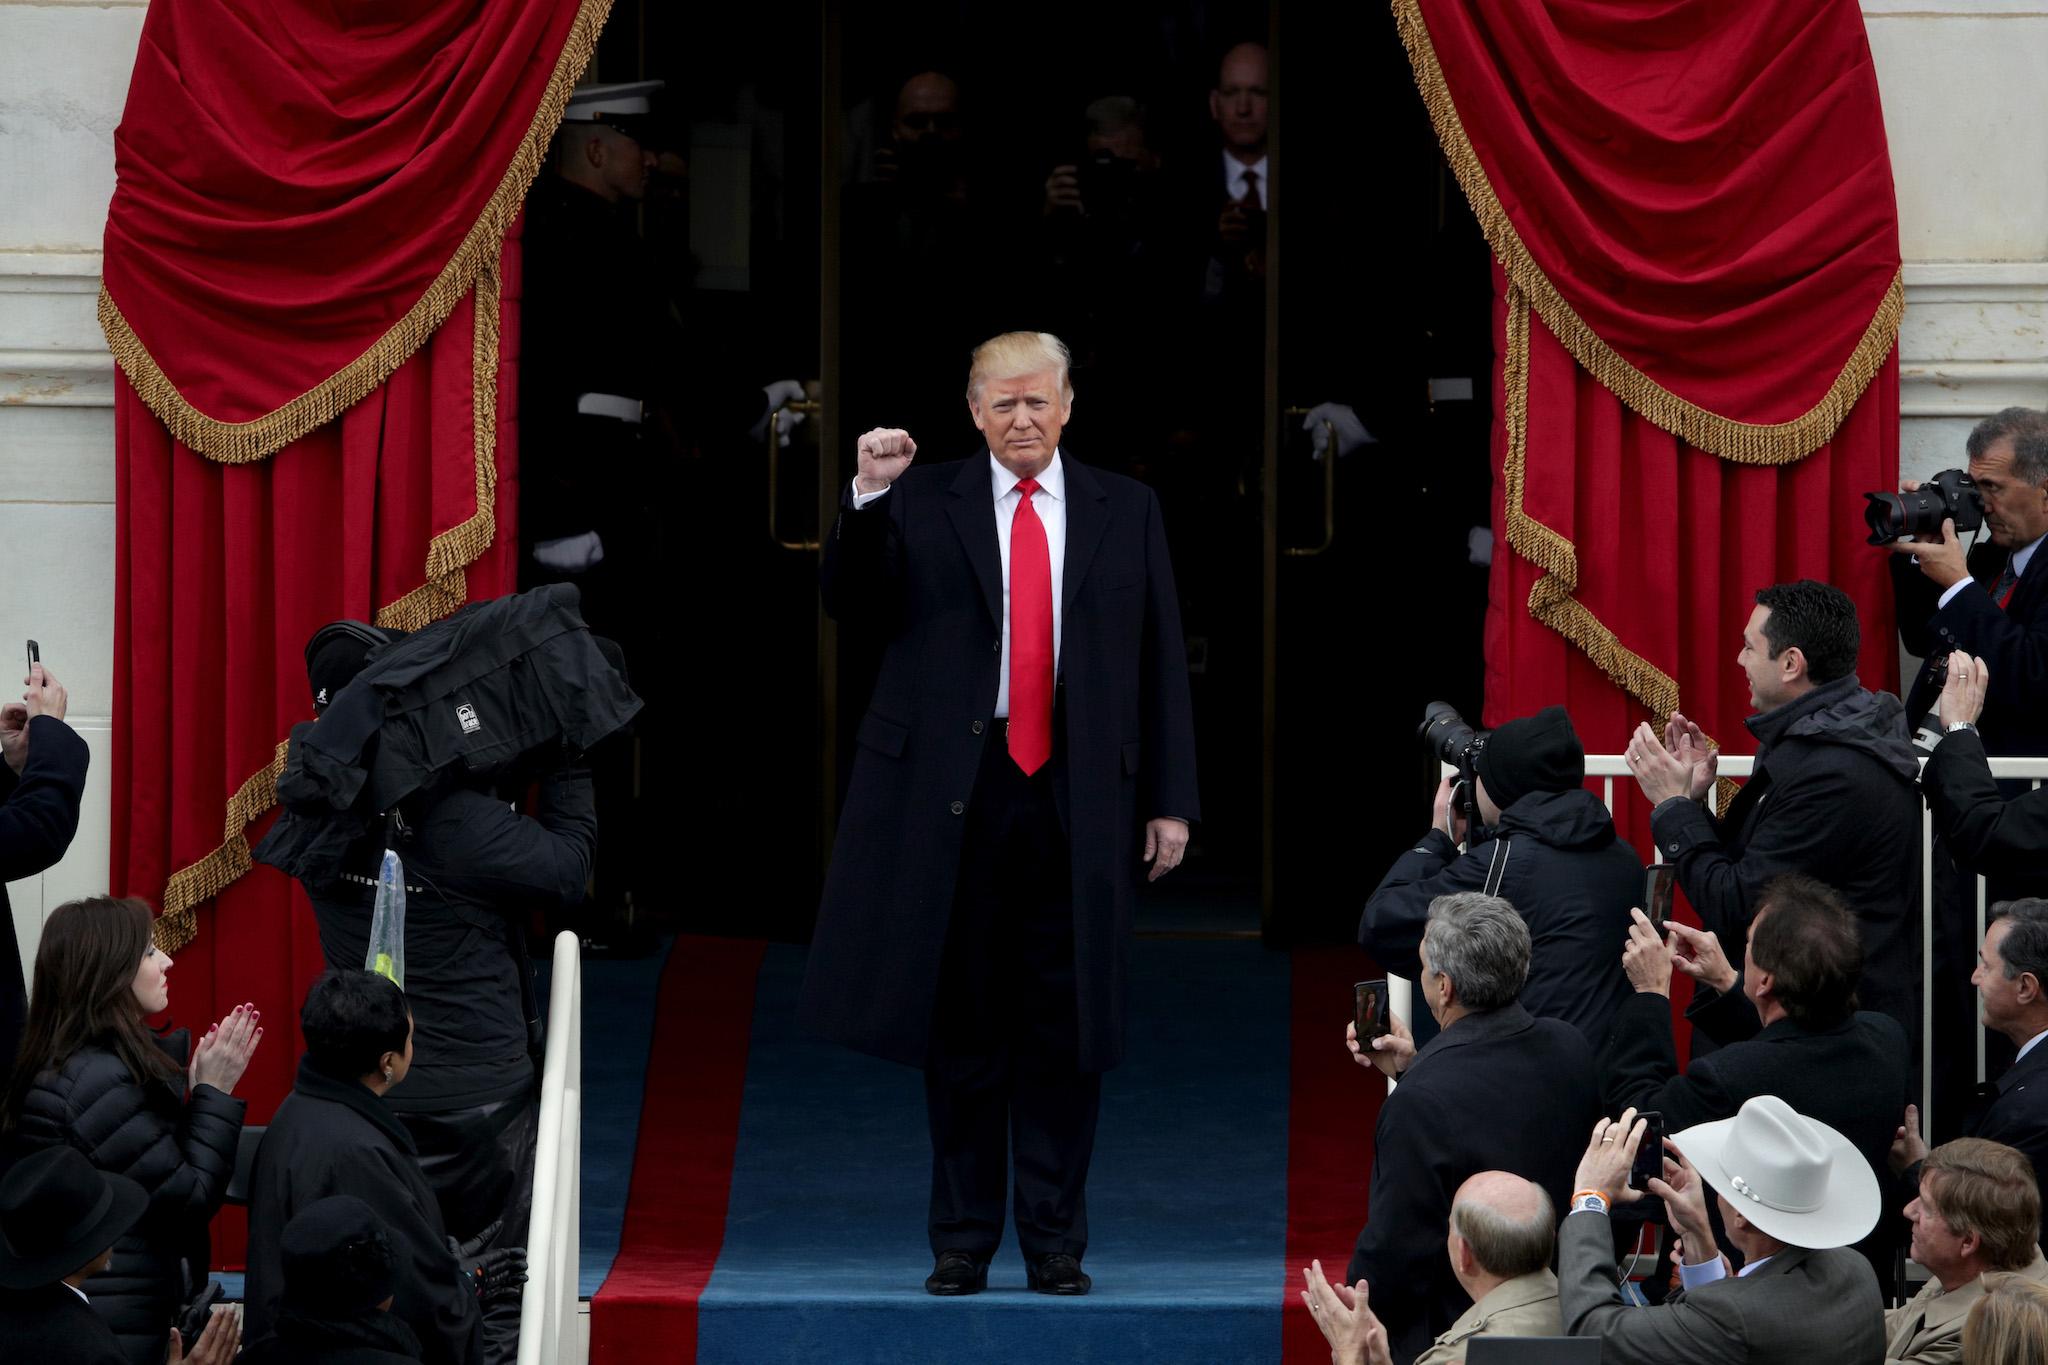 President Elect Donald Trump arrives on the West Front of the U.S. Capitol on January 20, 2017 in Washington, DC